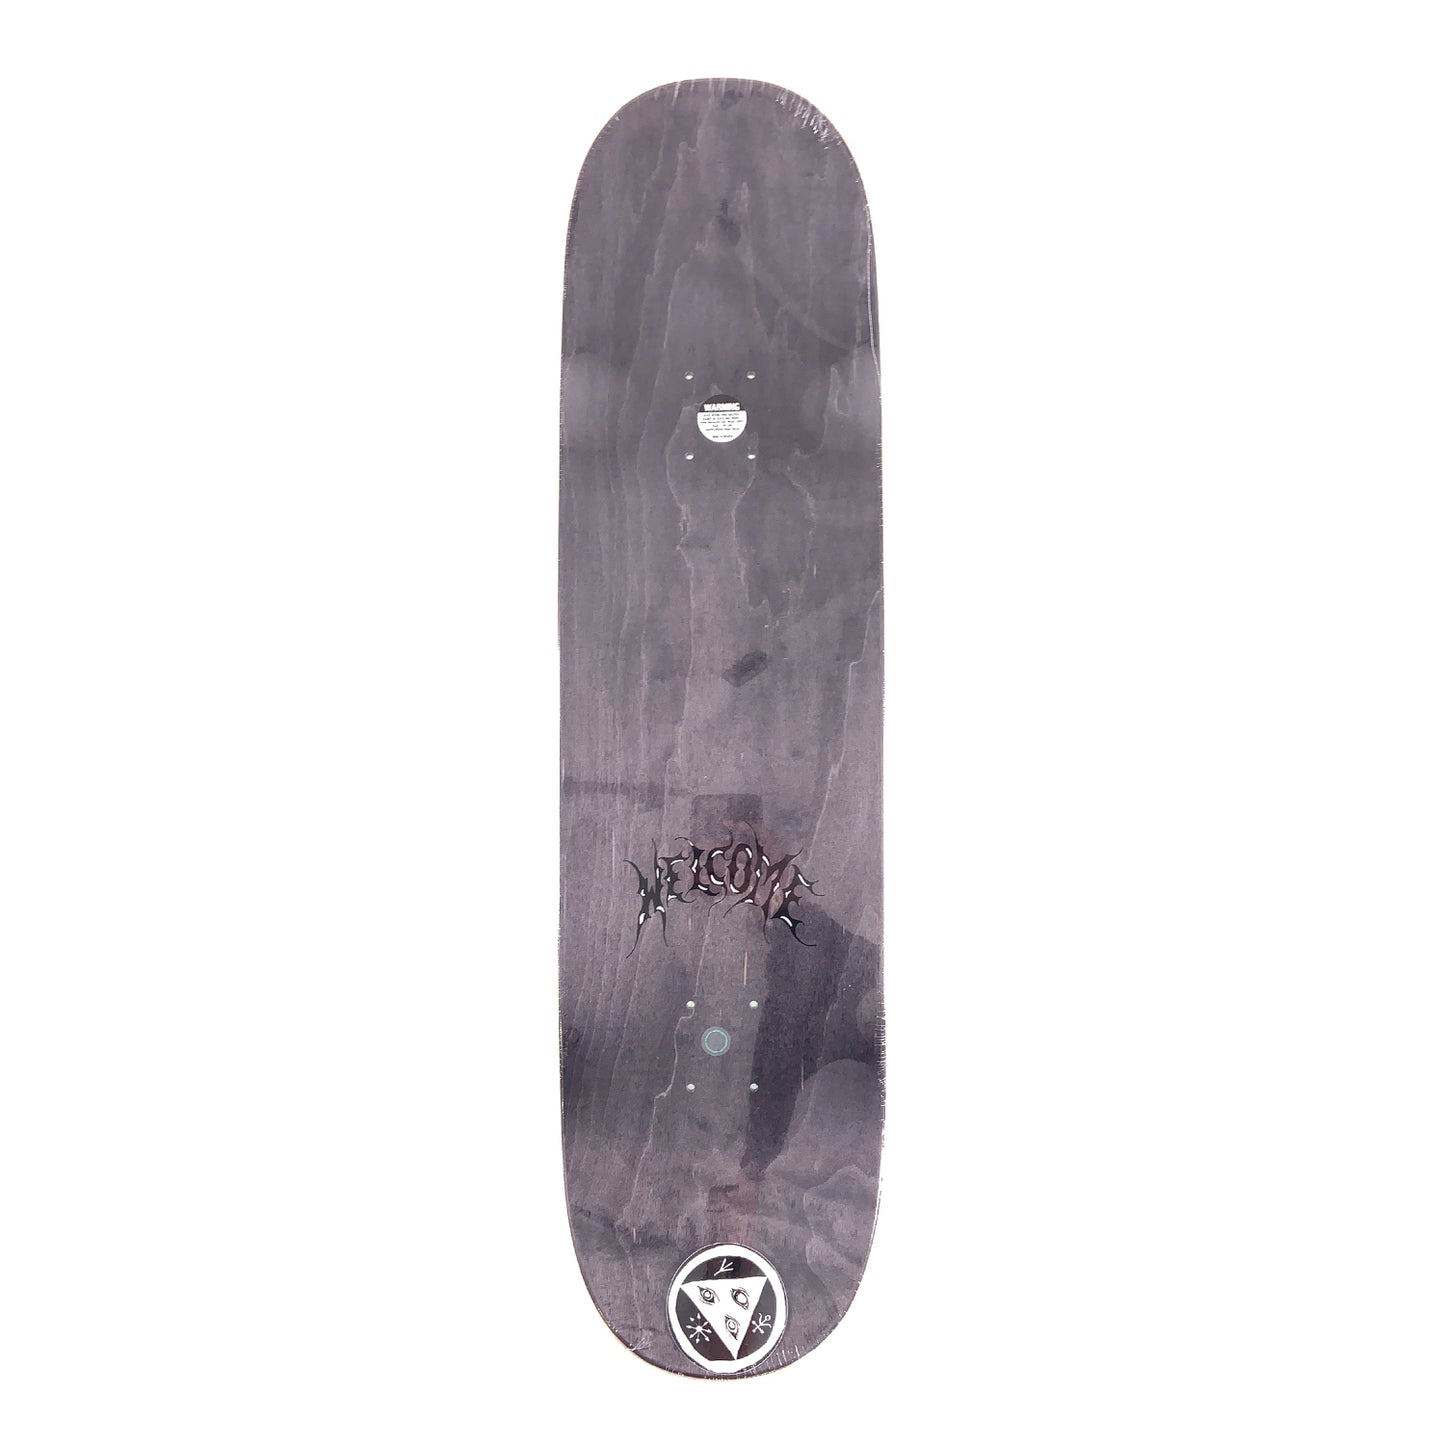 Welcome Ryan Townley Angel Pro Model on Enenra -Various Stains - 8.5" - Prime Delux Store